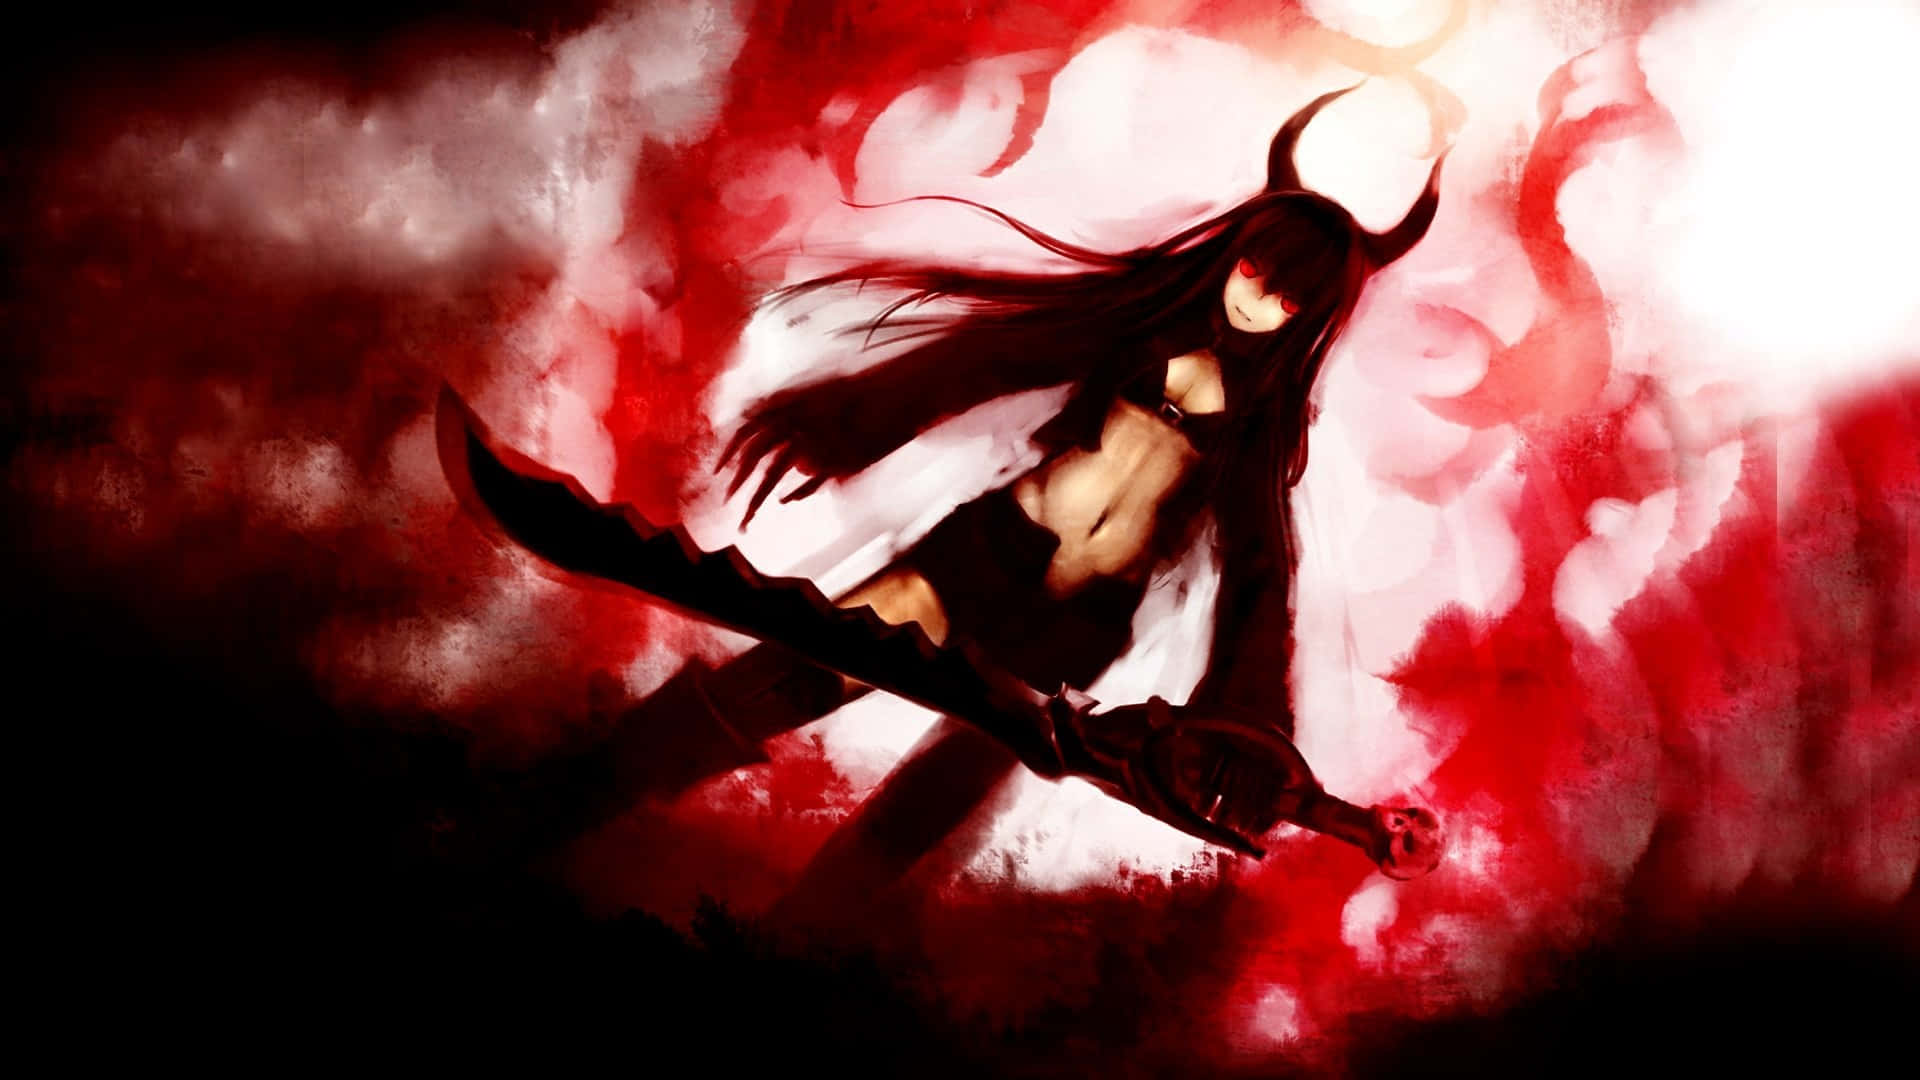 Red And Black Anime Holding Sword Wallpaper